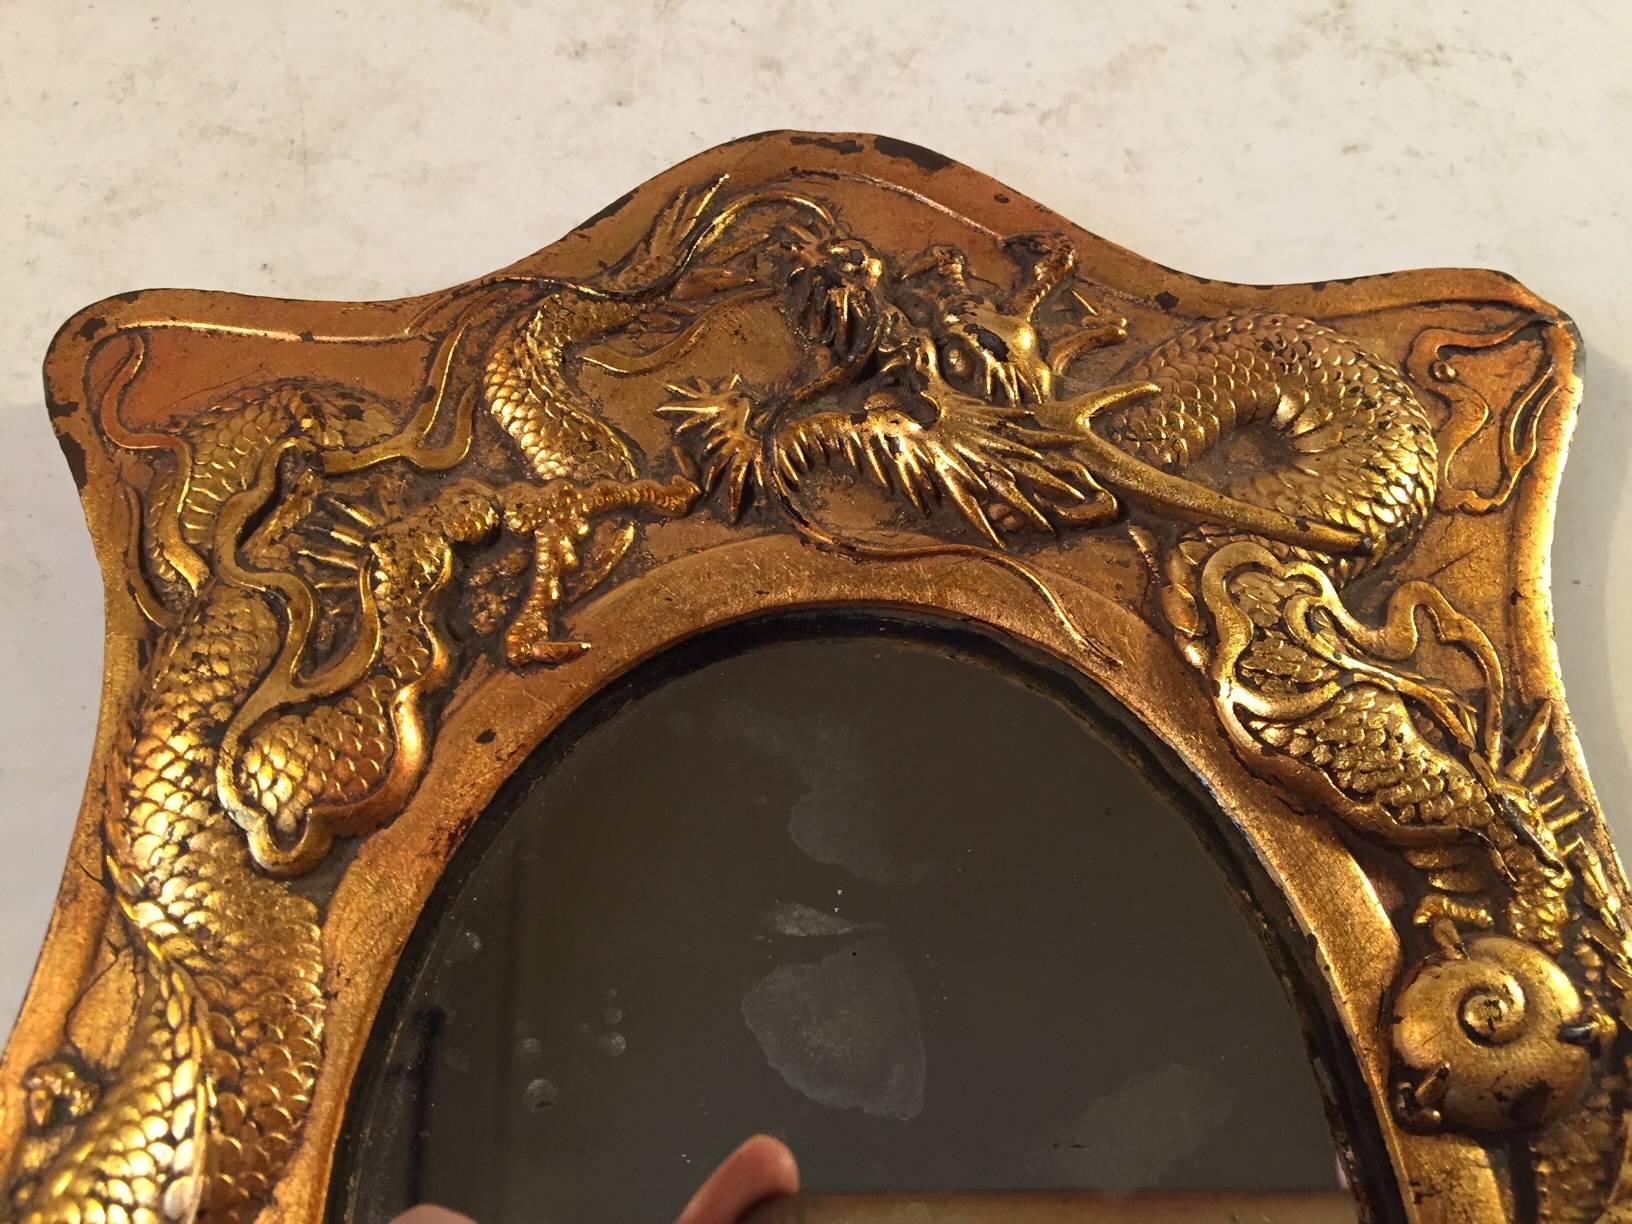 A very detailed Bronze mirror with raised motifs of dragons to the frame. It is a small mirror suited for make-up or decoration. It was manufactured in China between 1870-1900 and it was probably intended as a picture/photo frame. The measurements